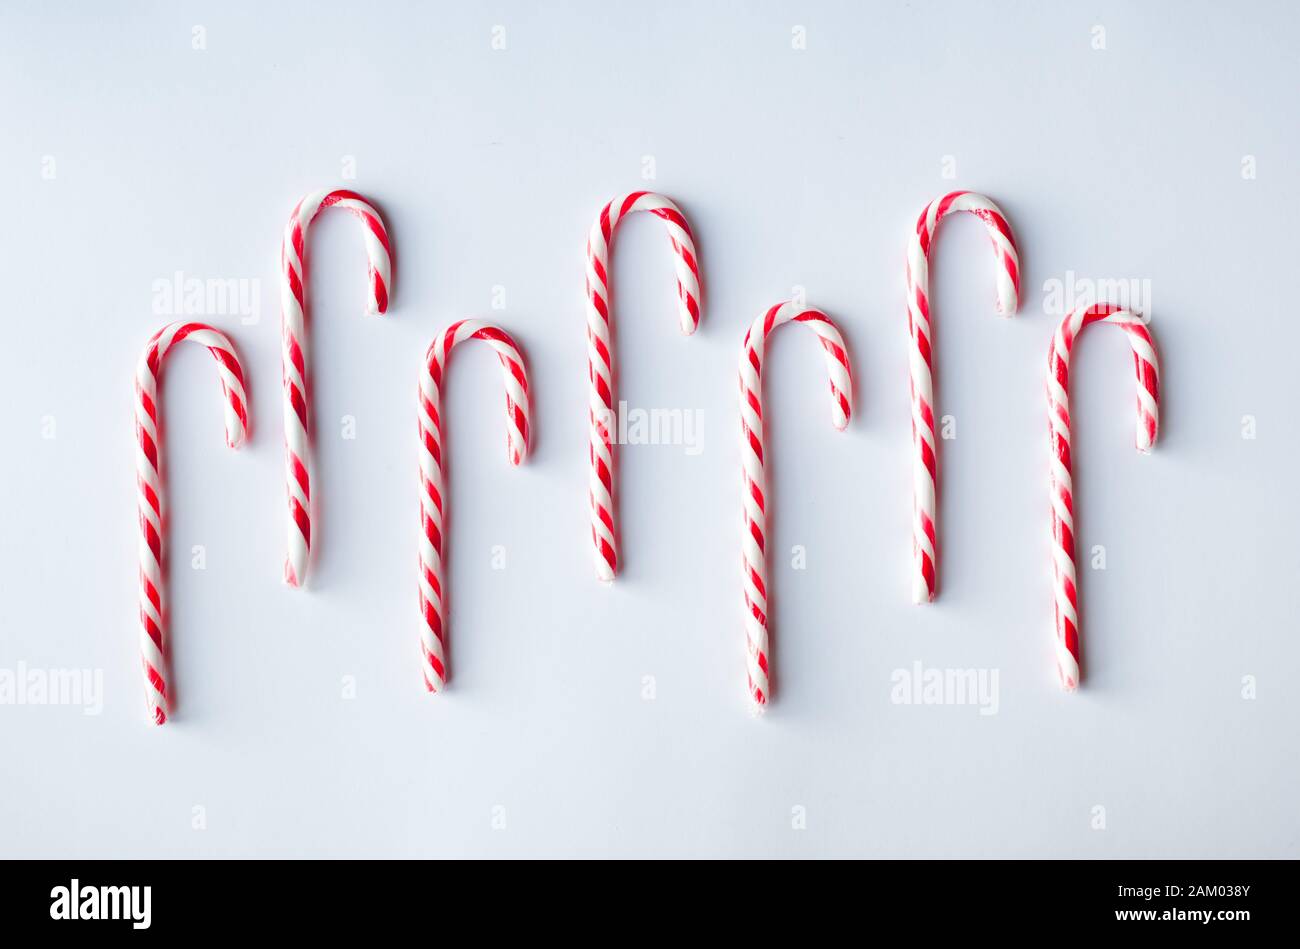 Candy canes arranged in a row on a plain white background. Stock Photo